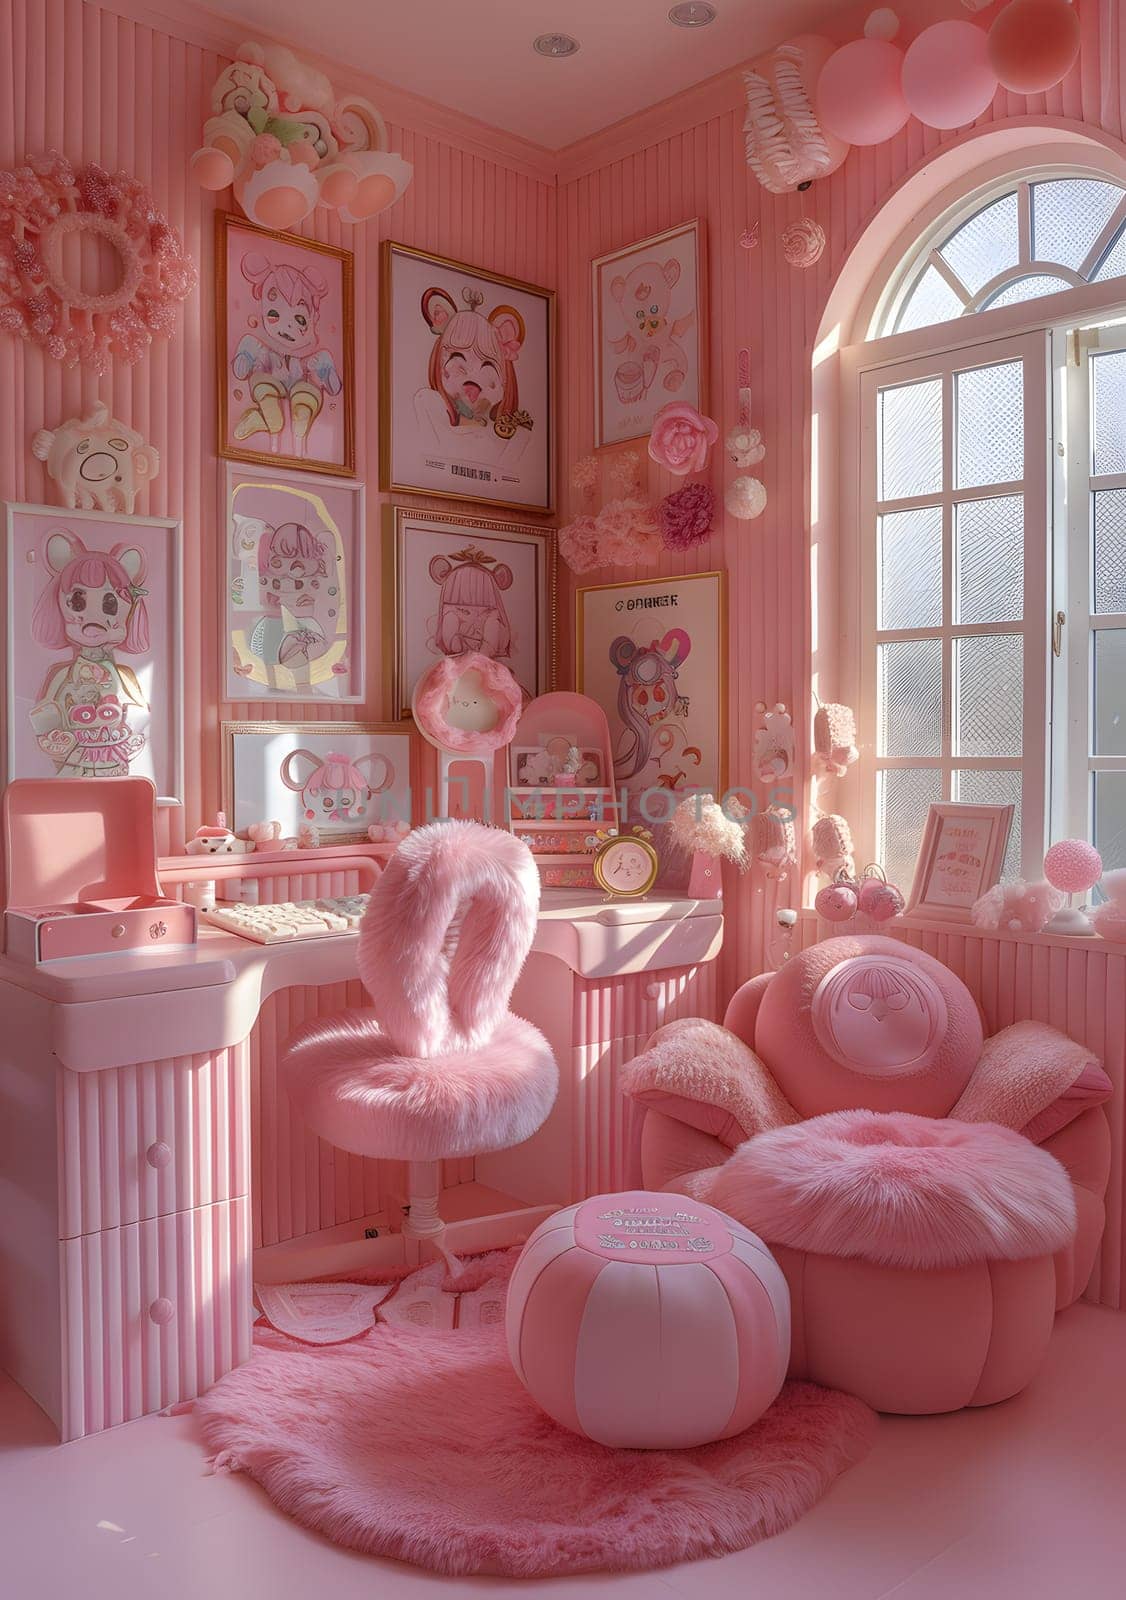 A magenta room filled with pink stuffed animals, complemented by wooden furniture, art pieces on the walls, and a large window letting in natural light